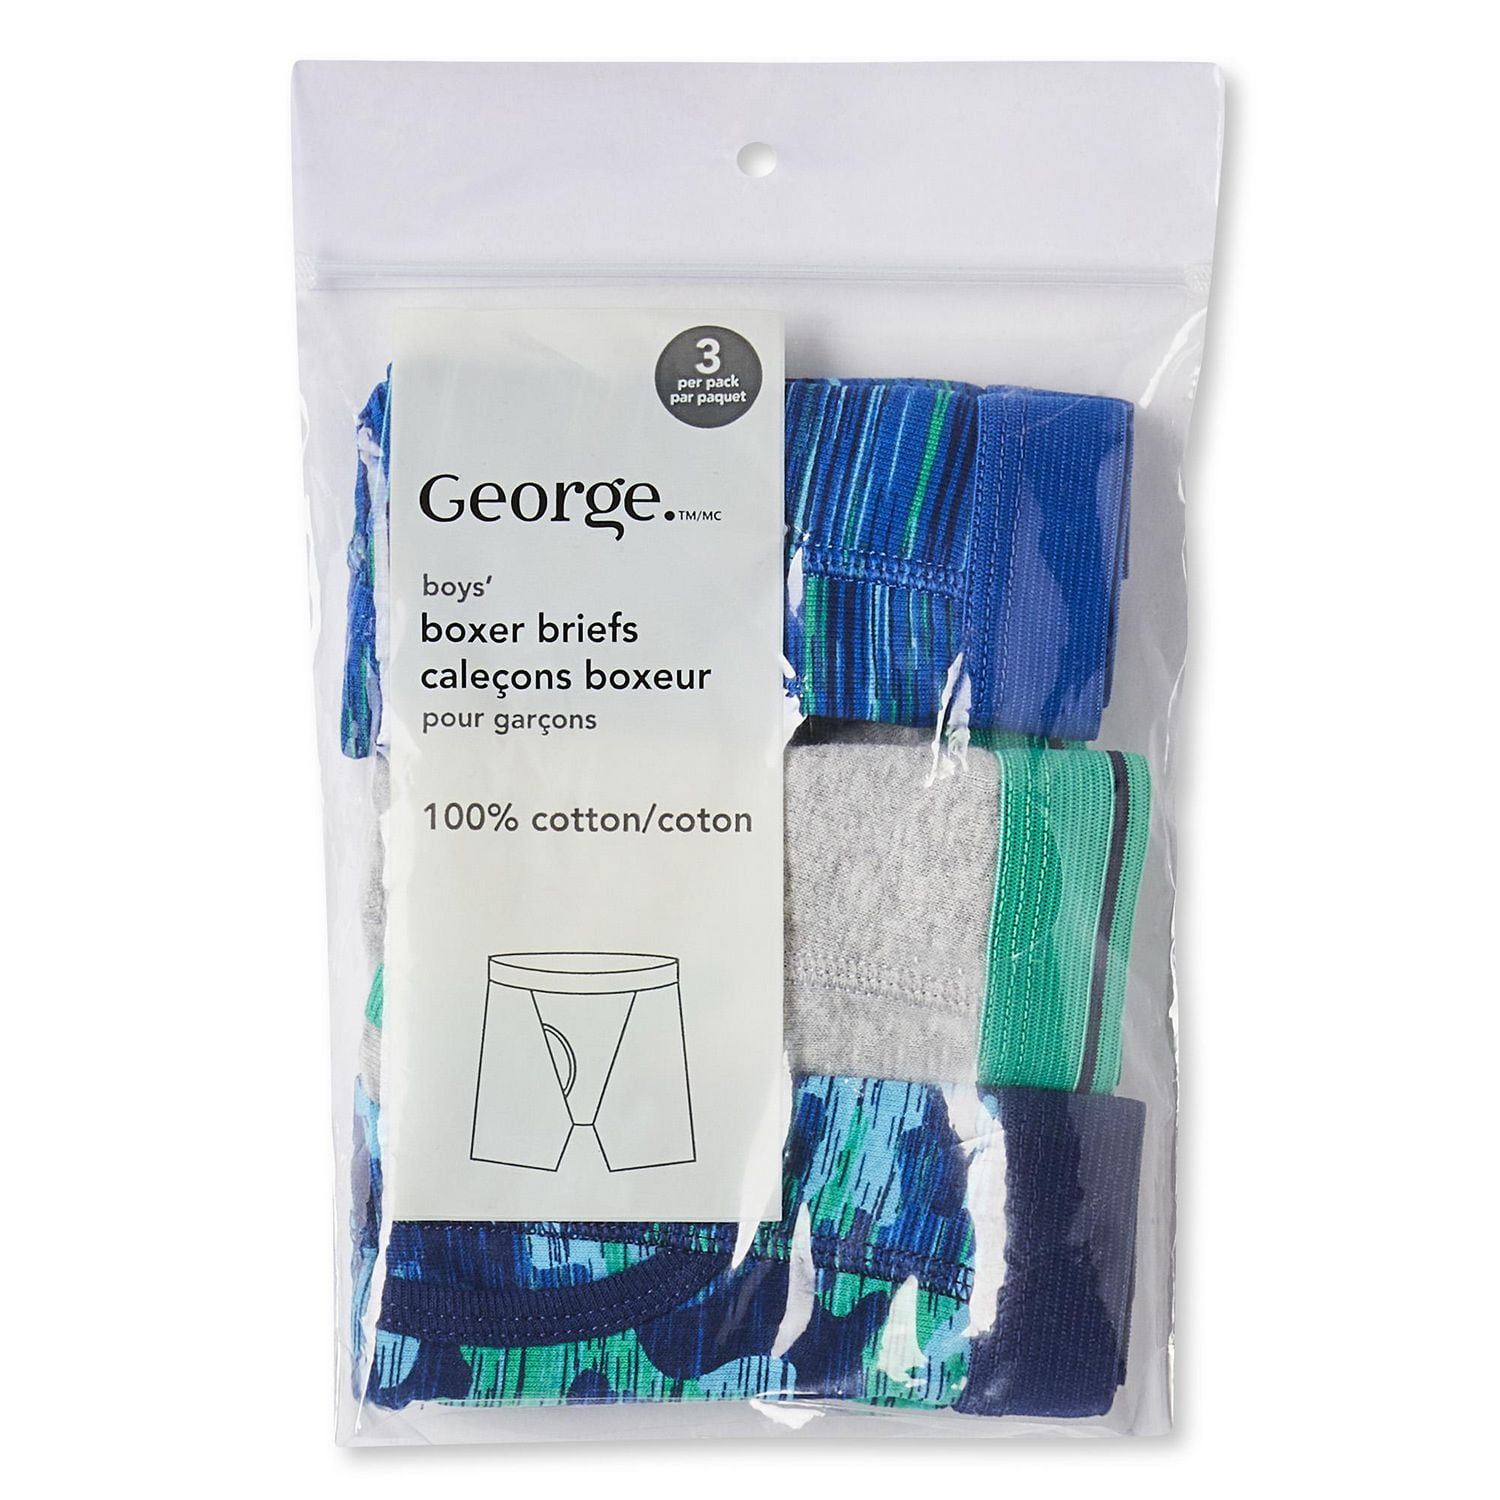 George Toddler Boys' Boxer Briefs 3-Pack, Sizes 2T-3T/4T